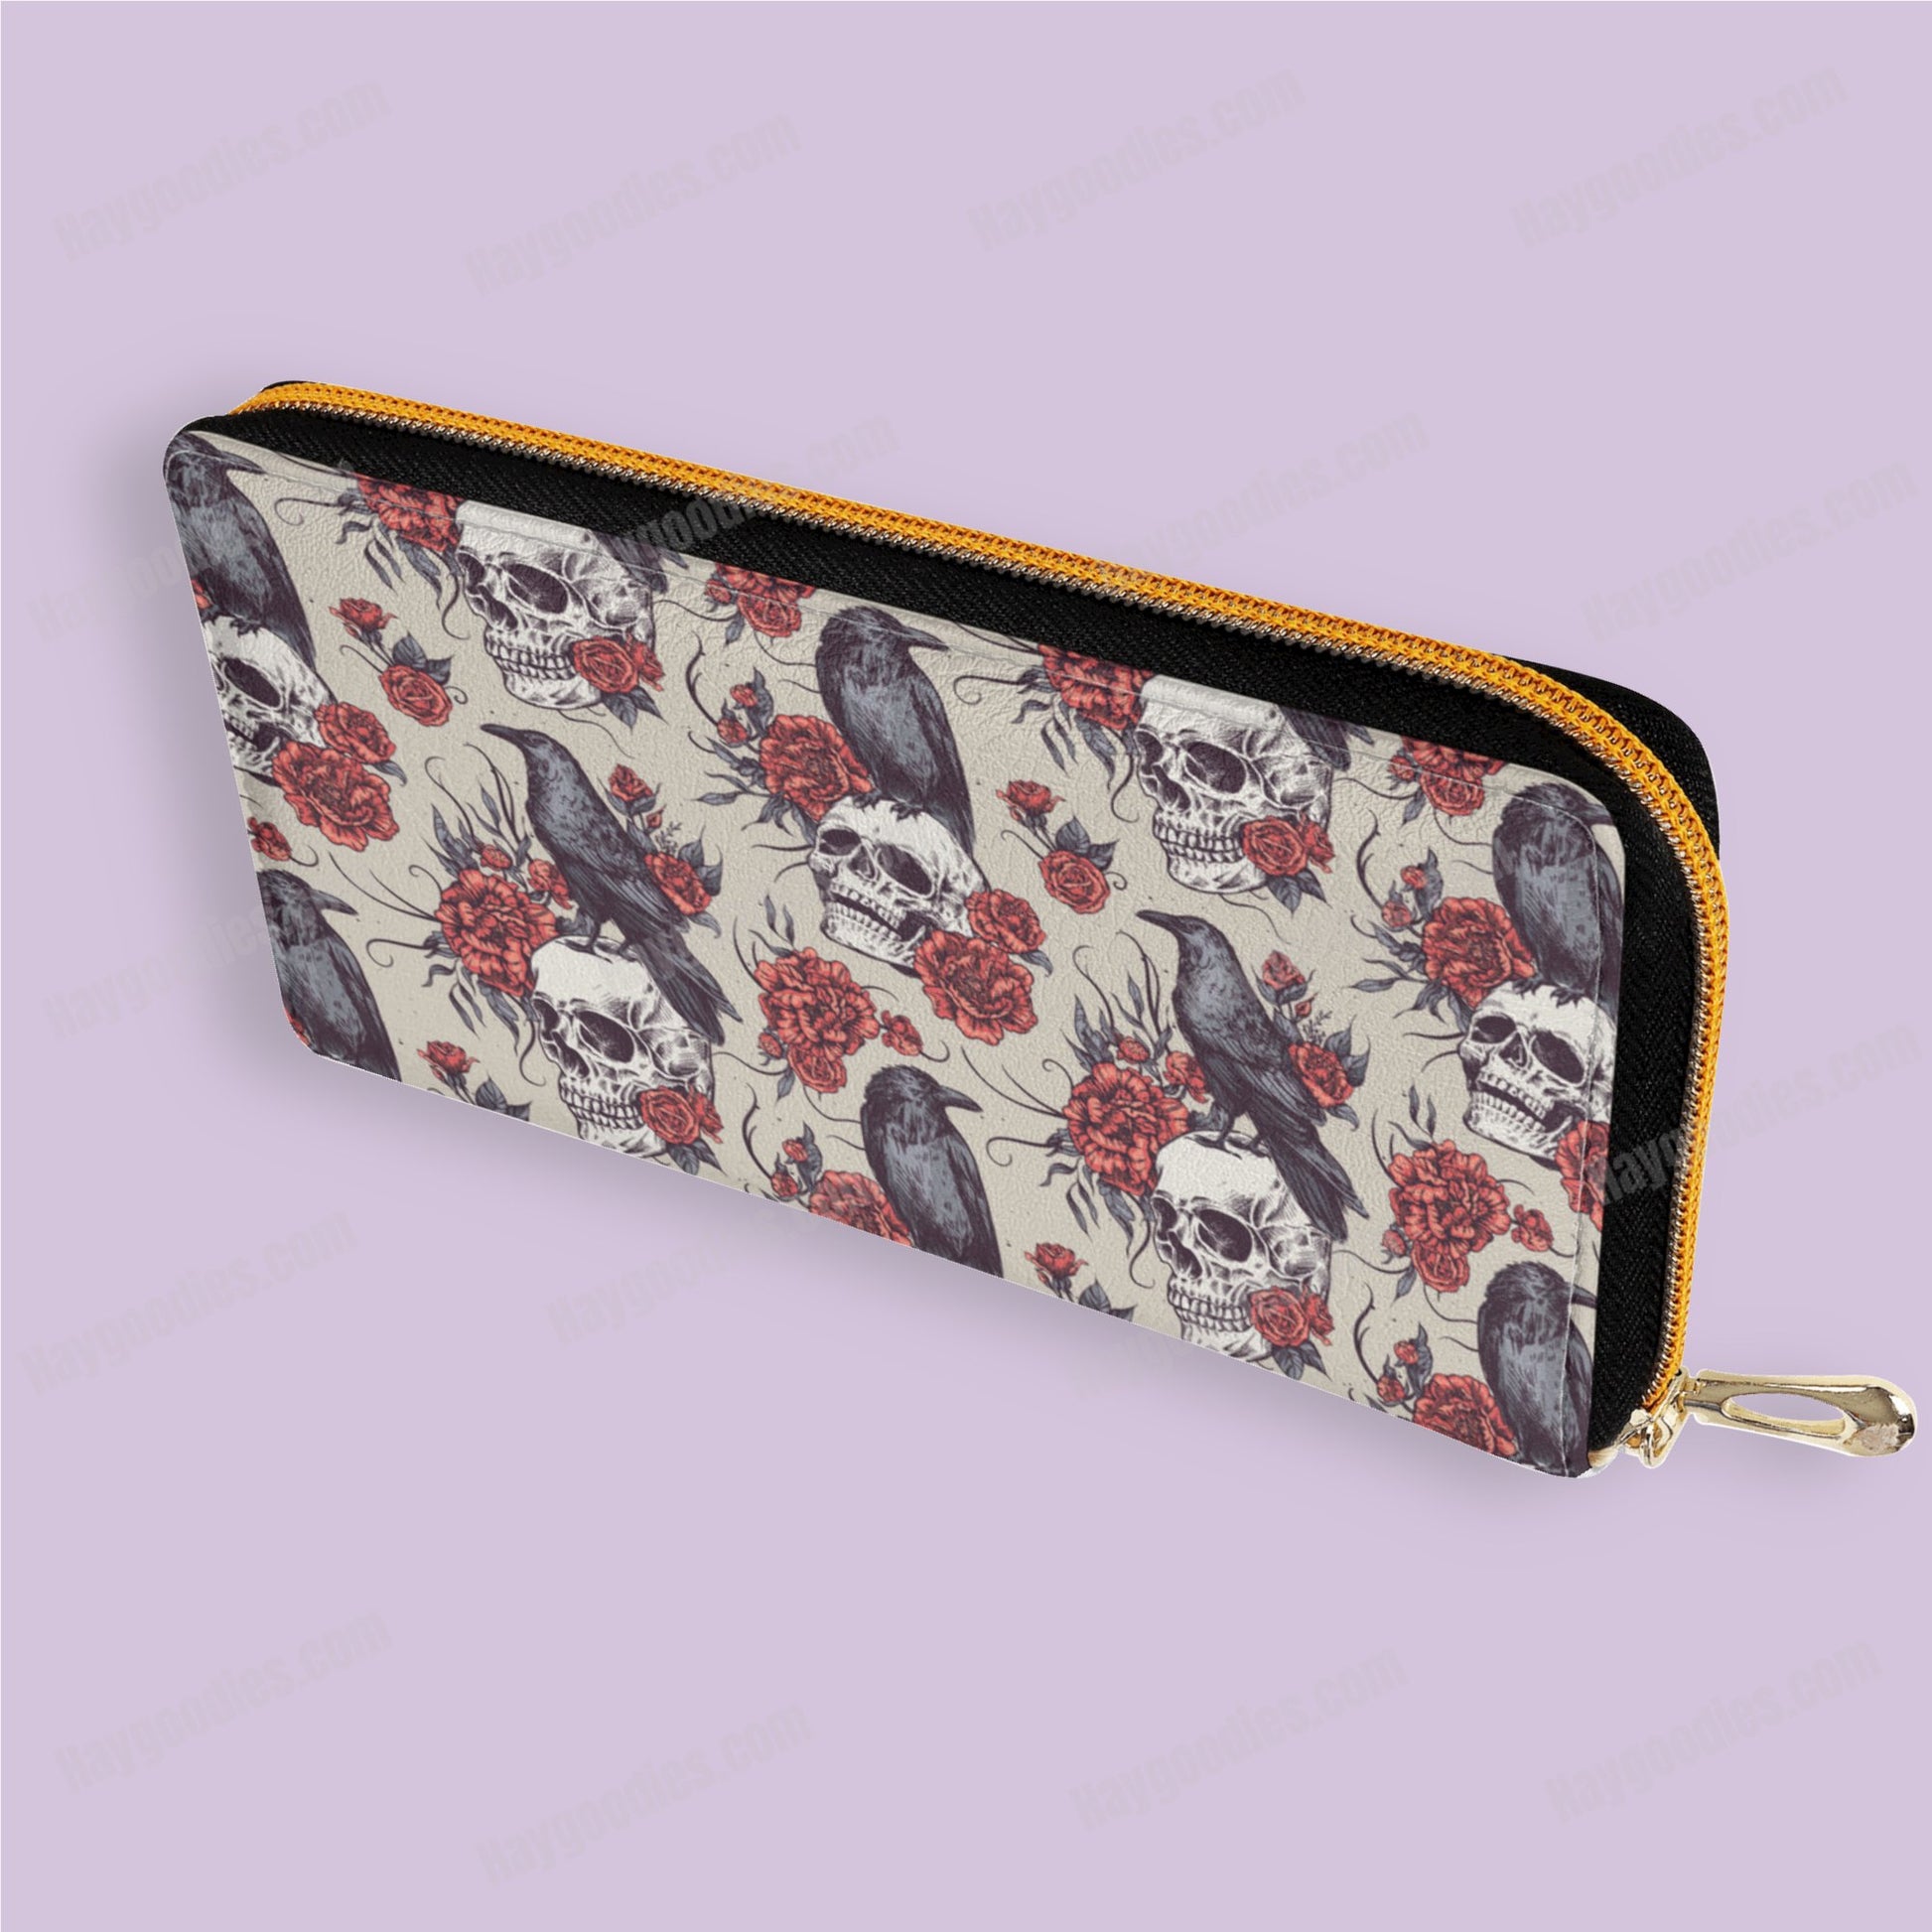 Skull, Crows and Roses Zipper Purse - HayGoodies - purse